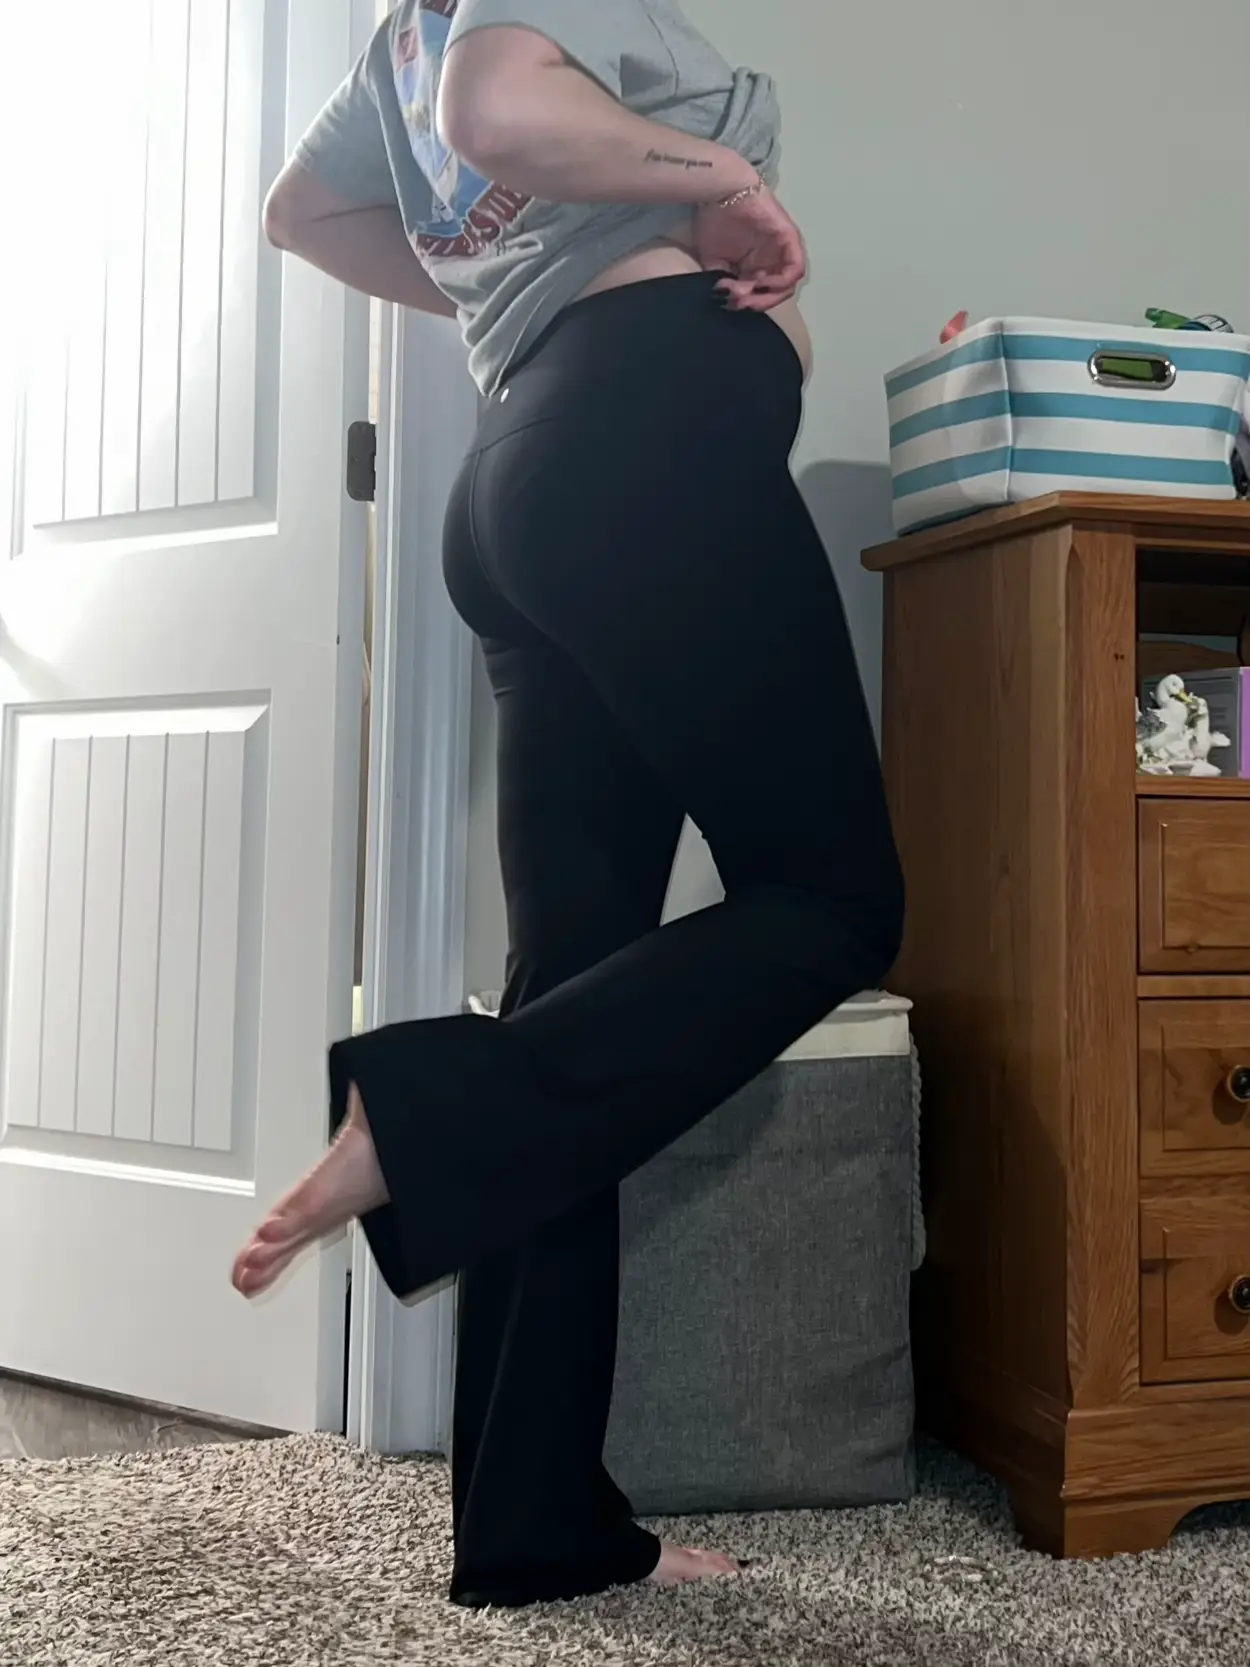 Yoga pants but make it 2022 ✔️ I'm 5'5” wearing the small 31